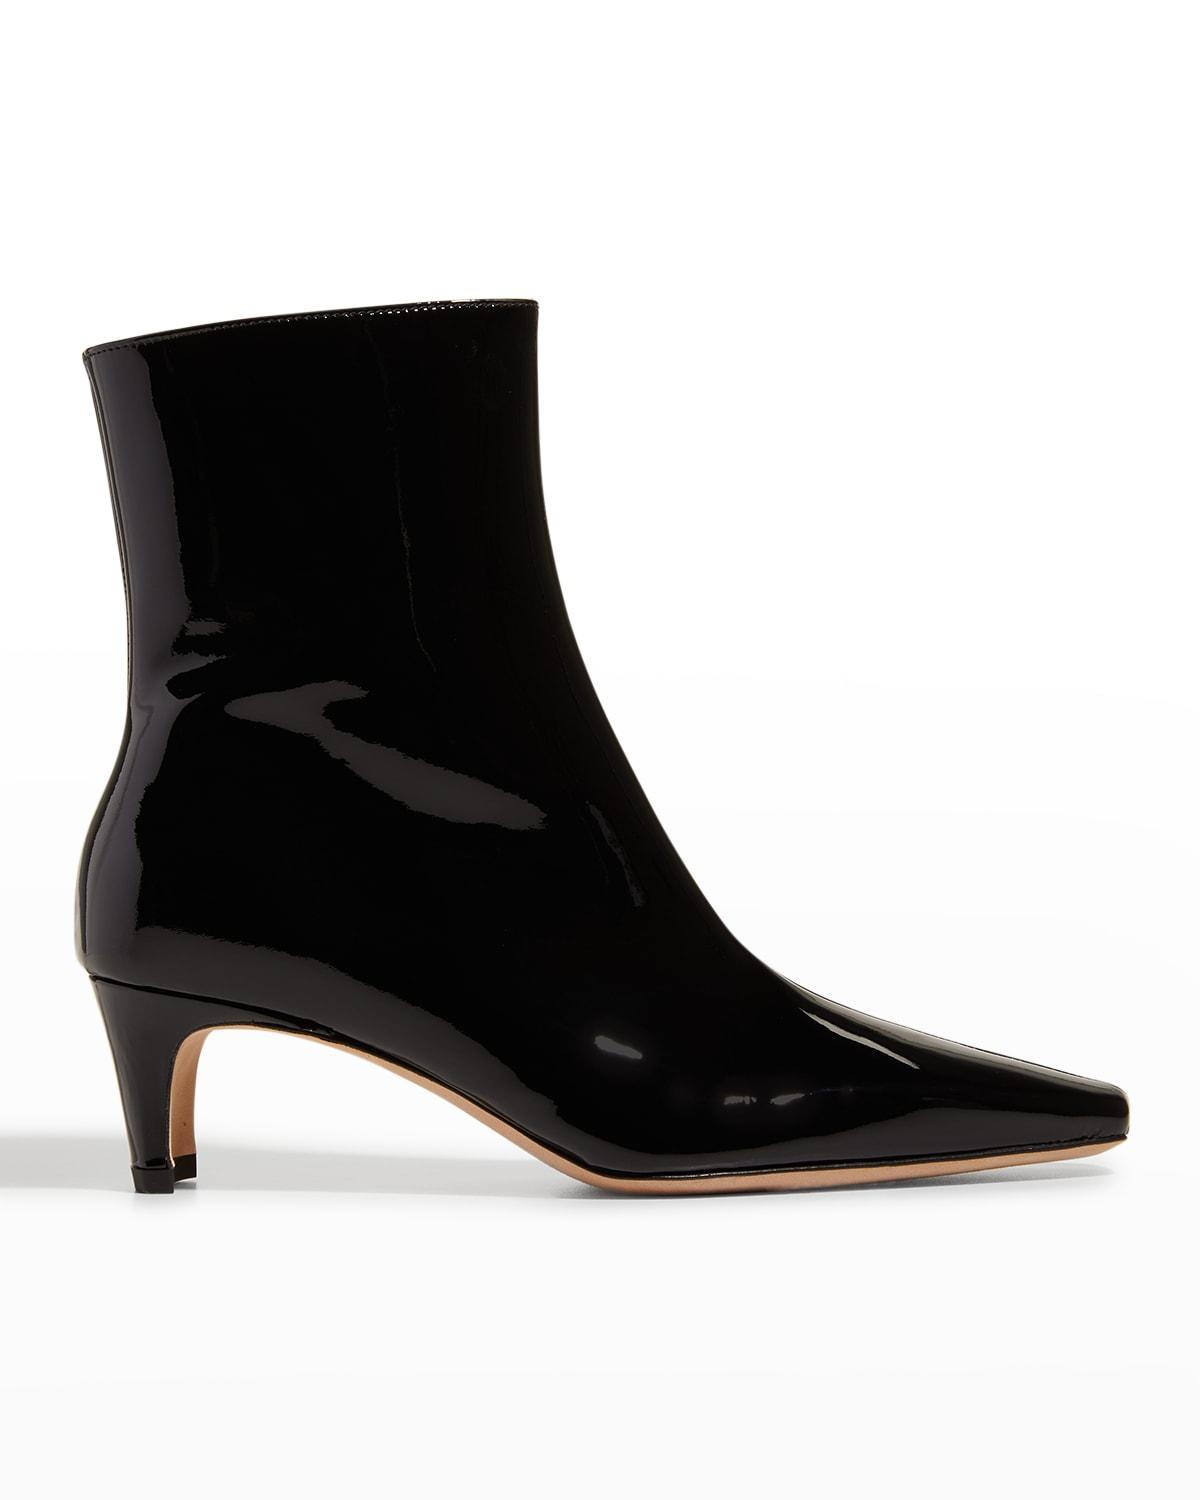 STAUD Wally Leather Square-toe Ankle Booties in Black | Lyst